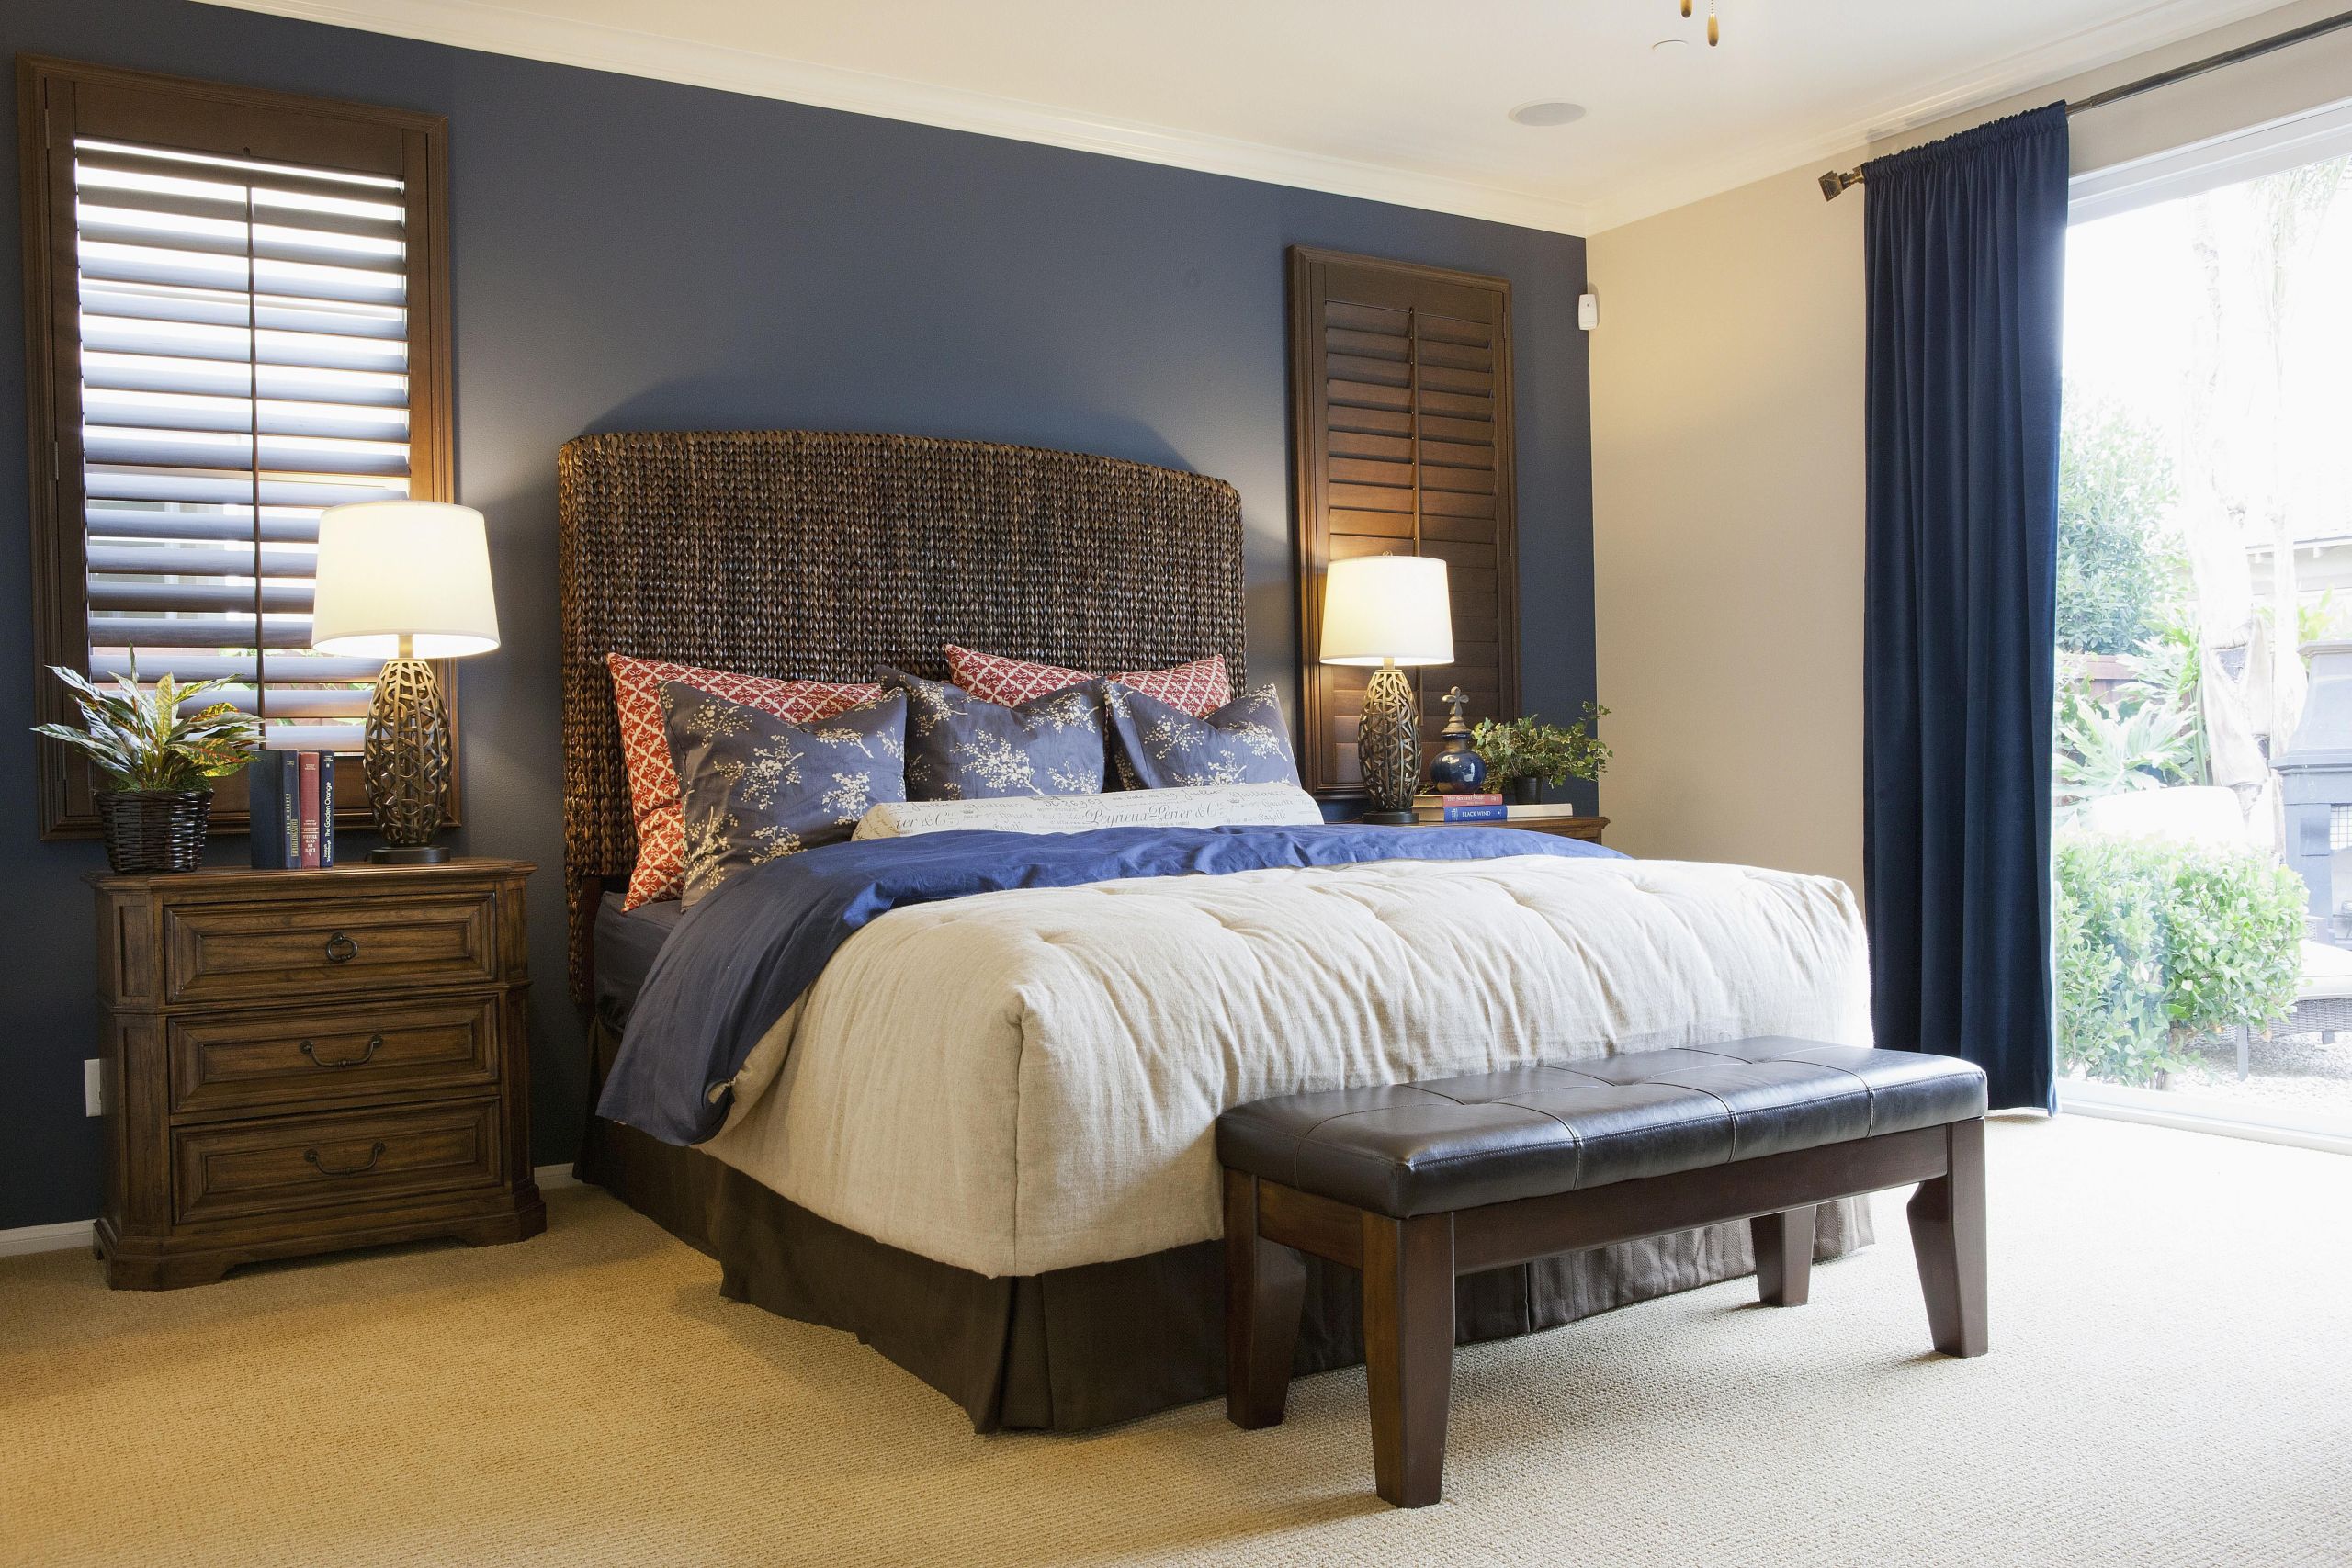 Pictures For Bedroom Walls
 How to Choose an Accent Wall and Color in a Bedroom